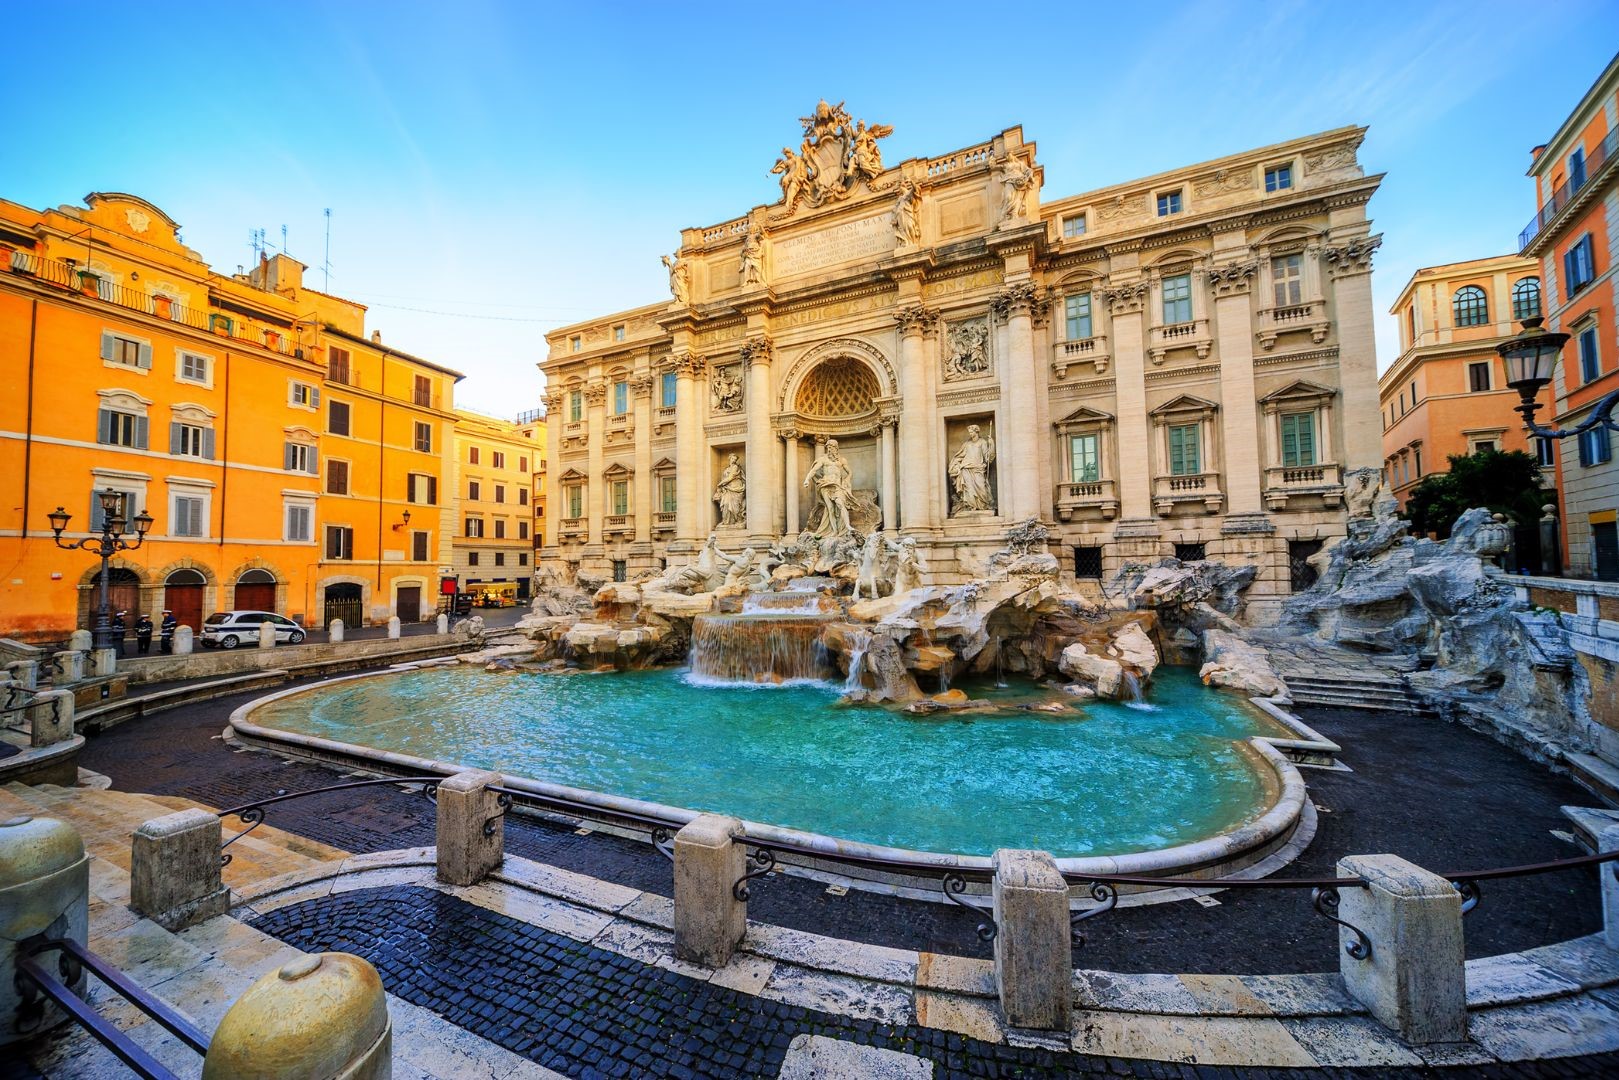 Trevi Fountain promises your return to this eternal city.